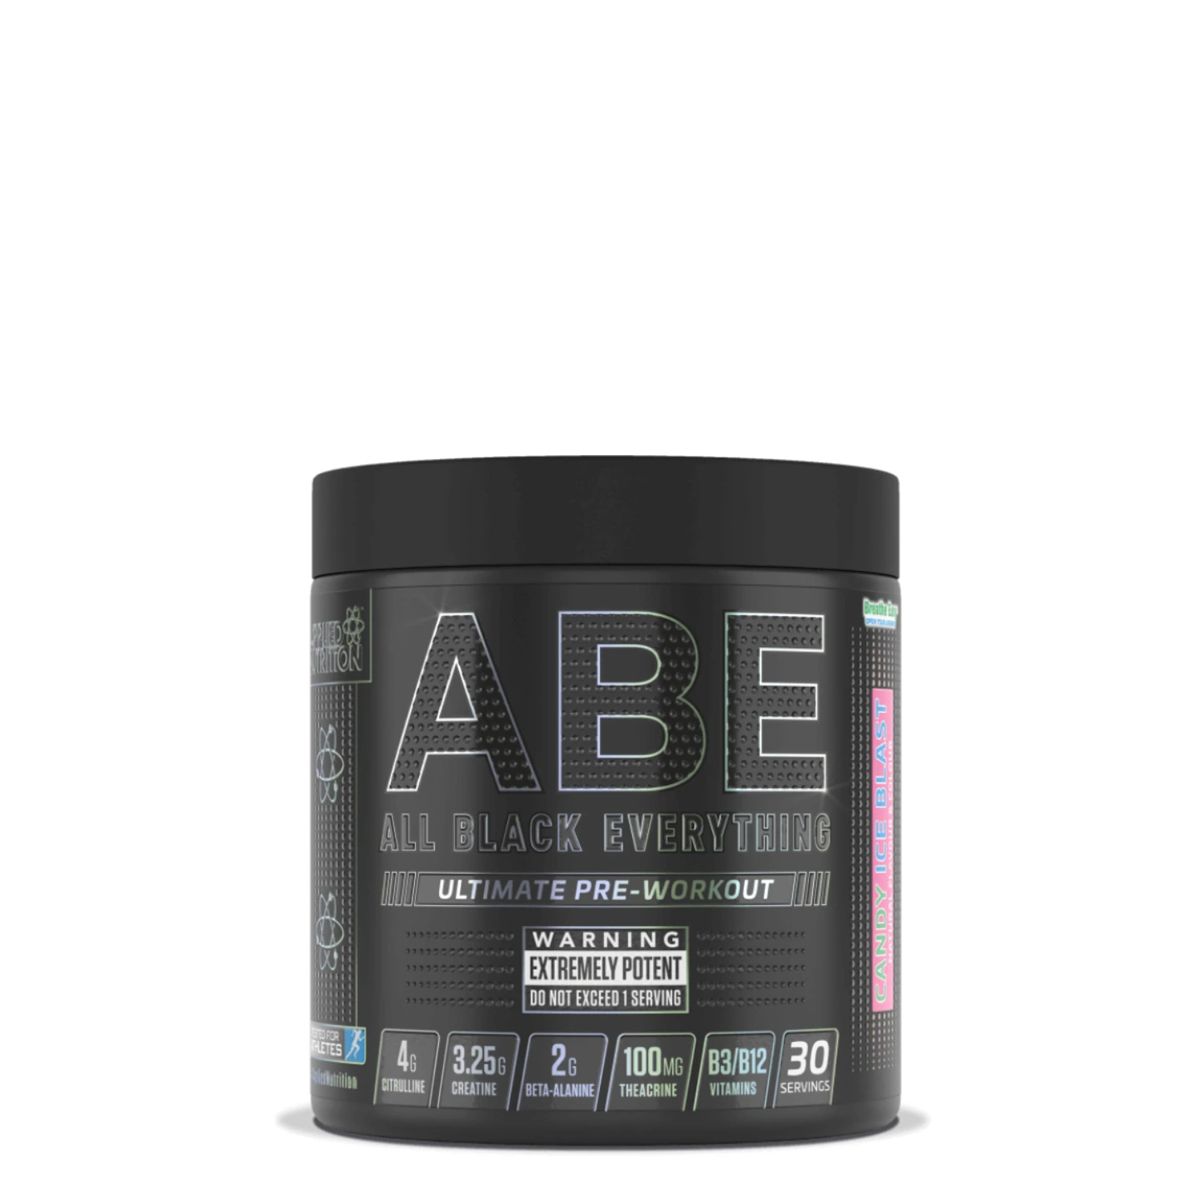 APPLIED NUTRITION - ABE - ALL BLACK EVERYTHING - ULTIMATE PRE-WORKOUT - 375